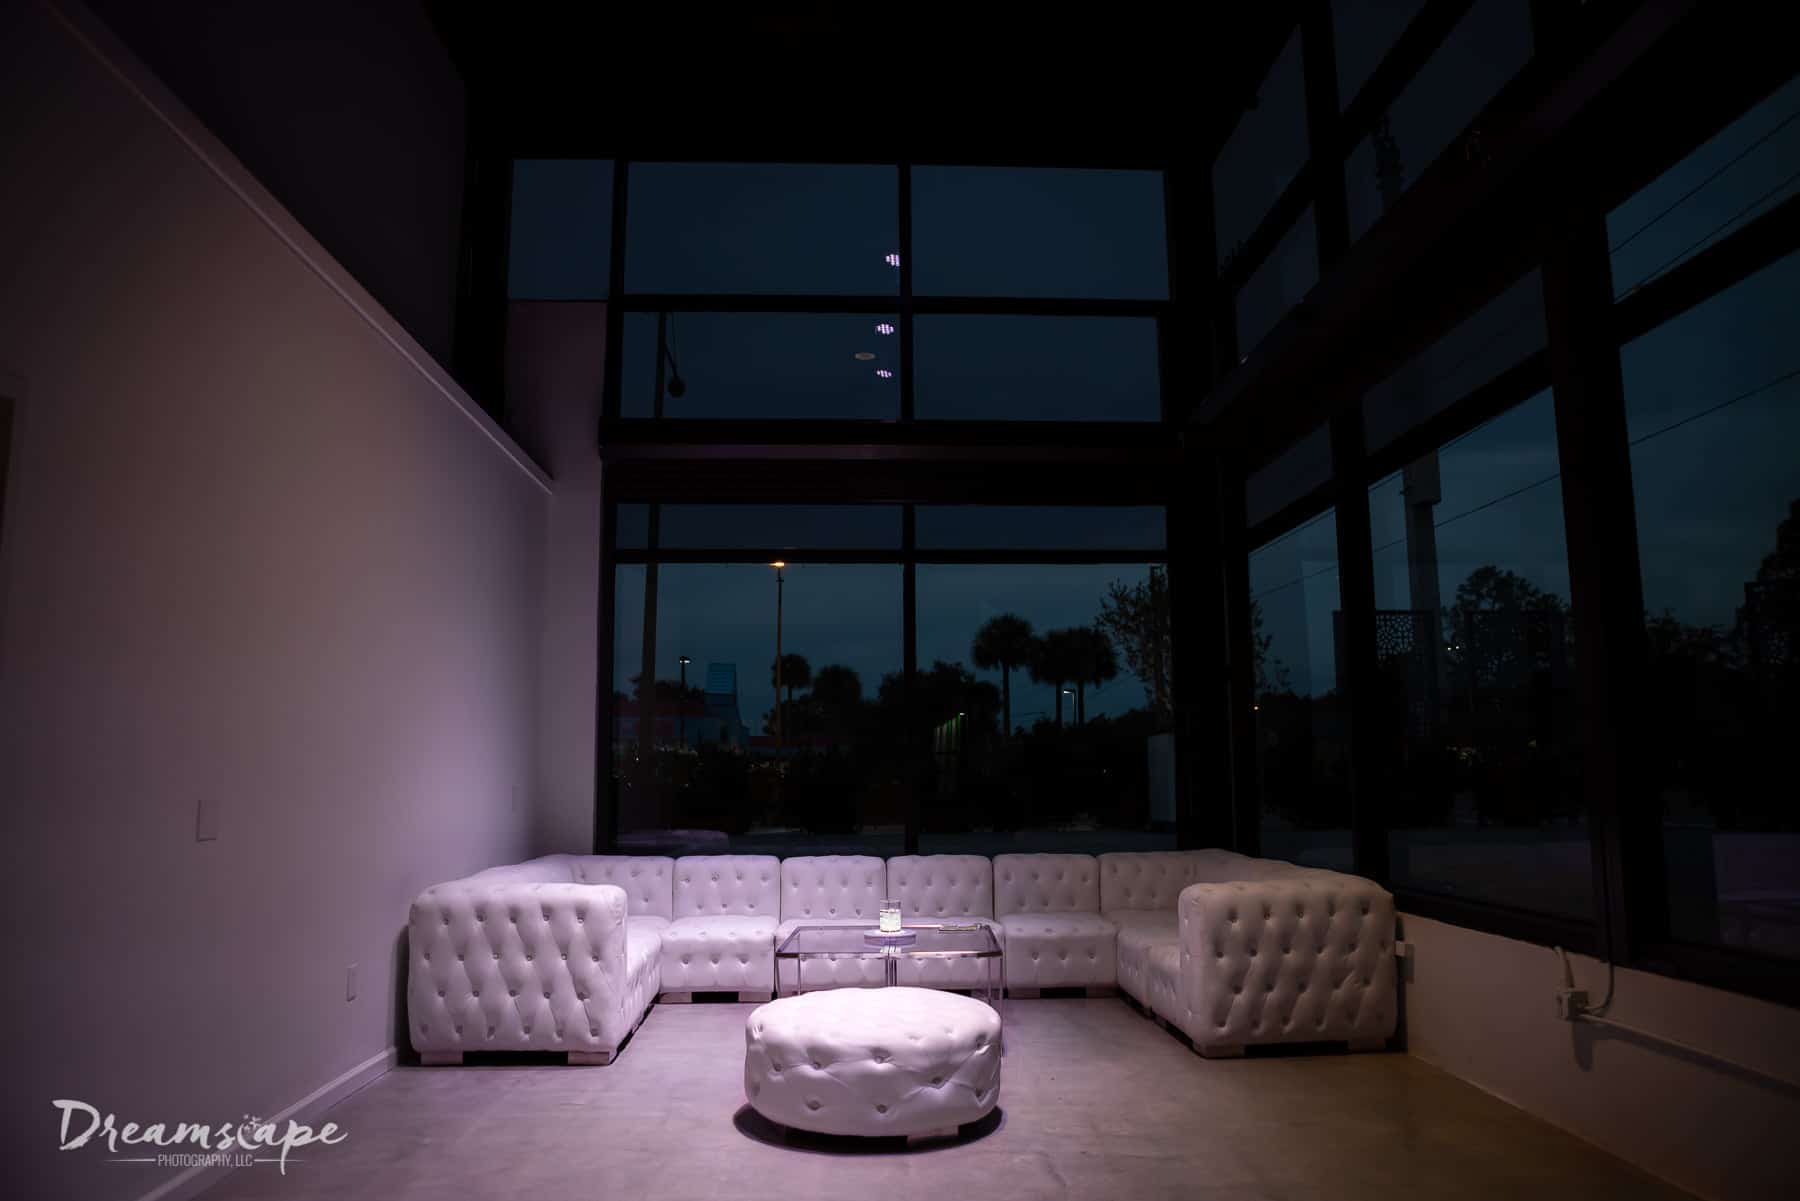 nighttime image of white leather sofas with clear coffee table in front of large windows and white wall to the left